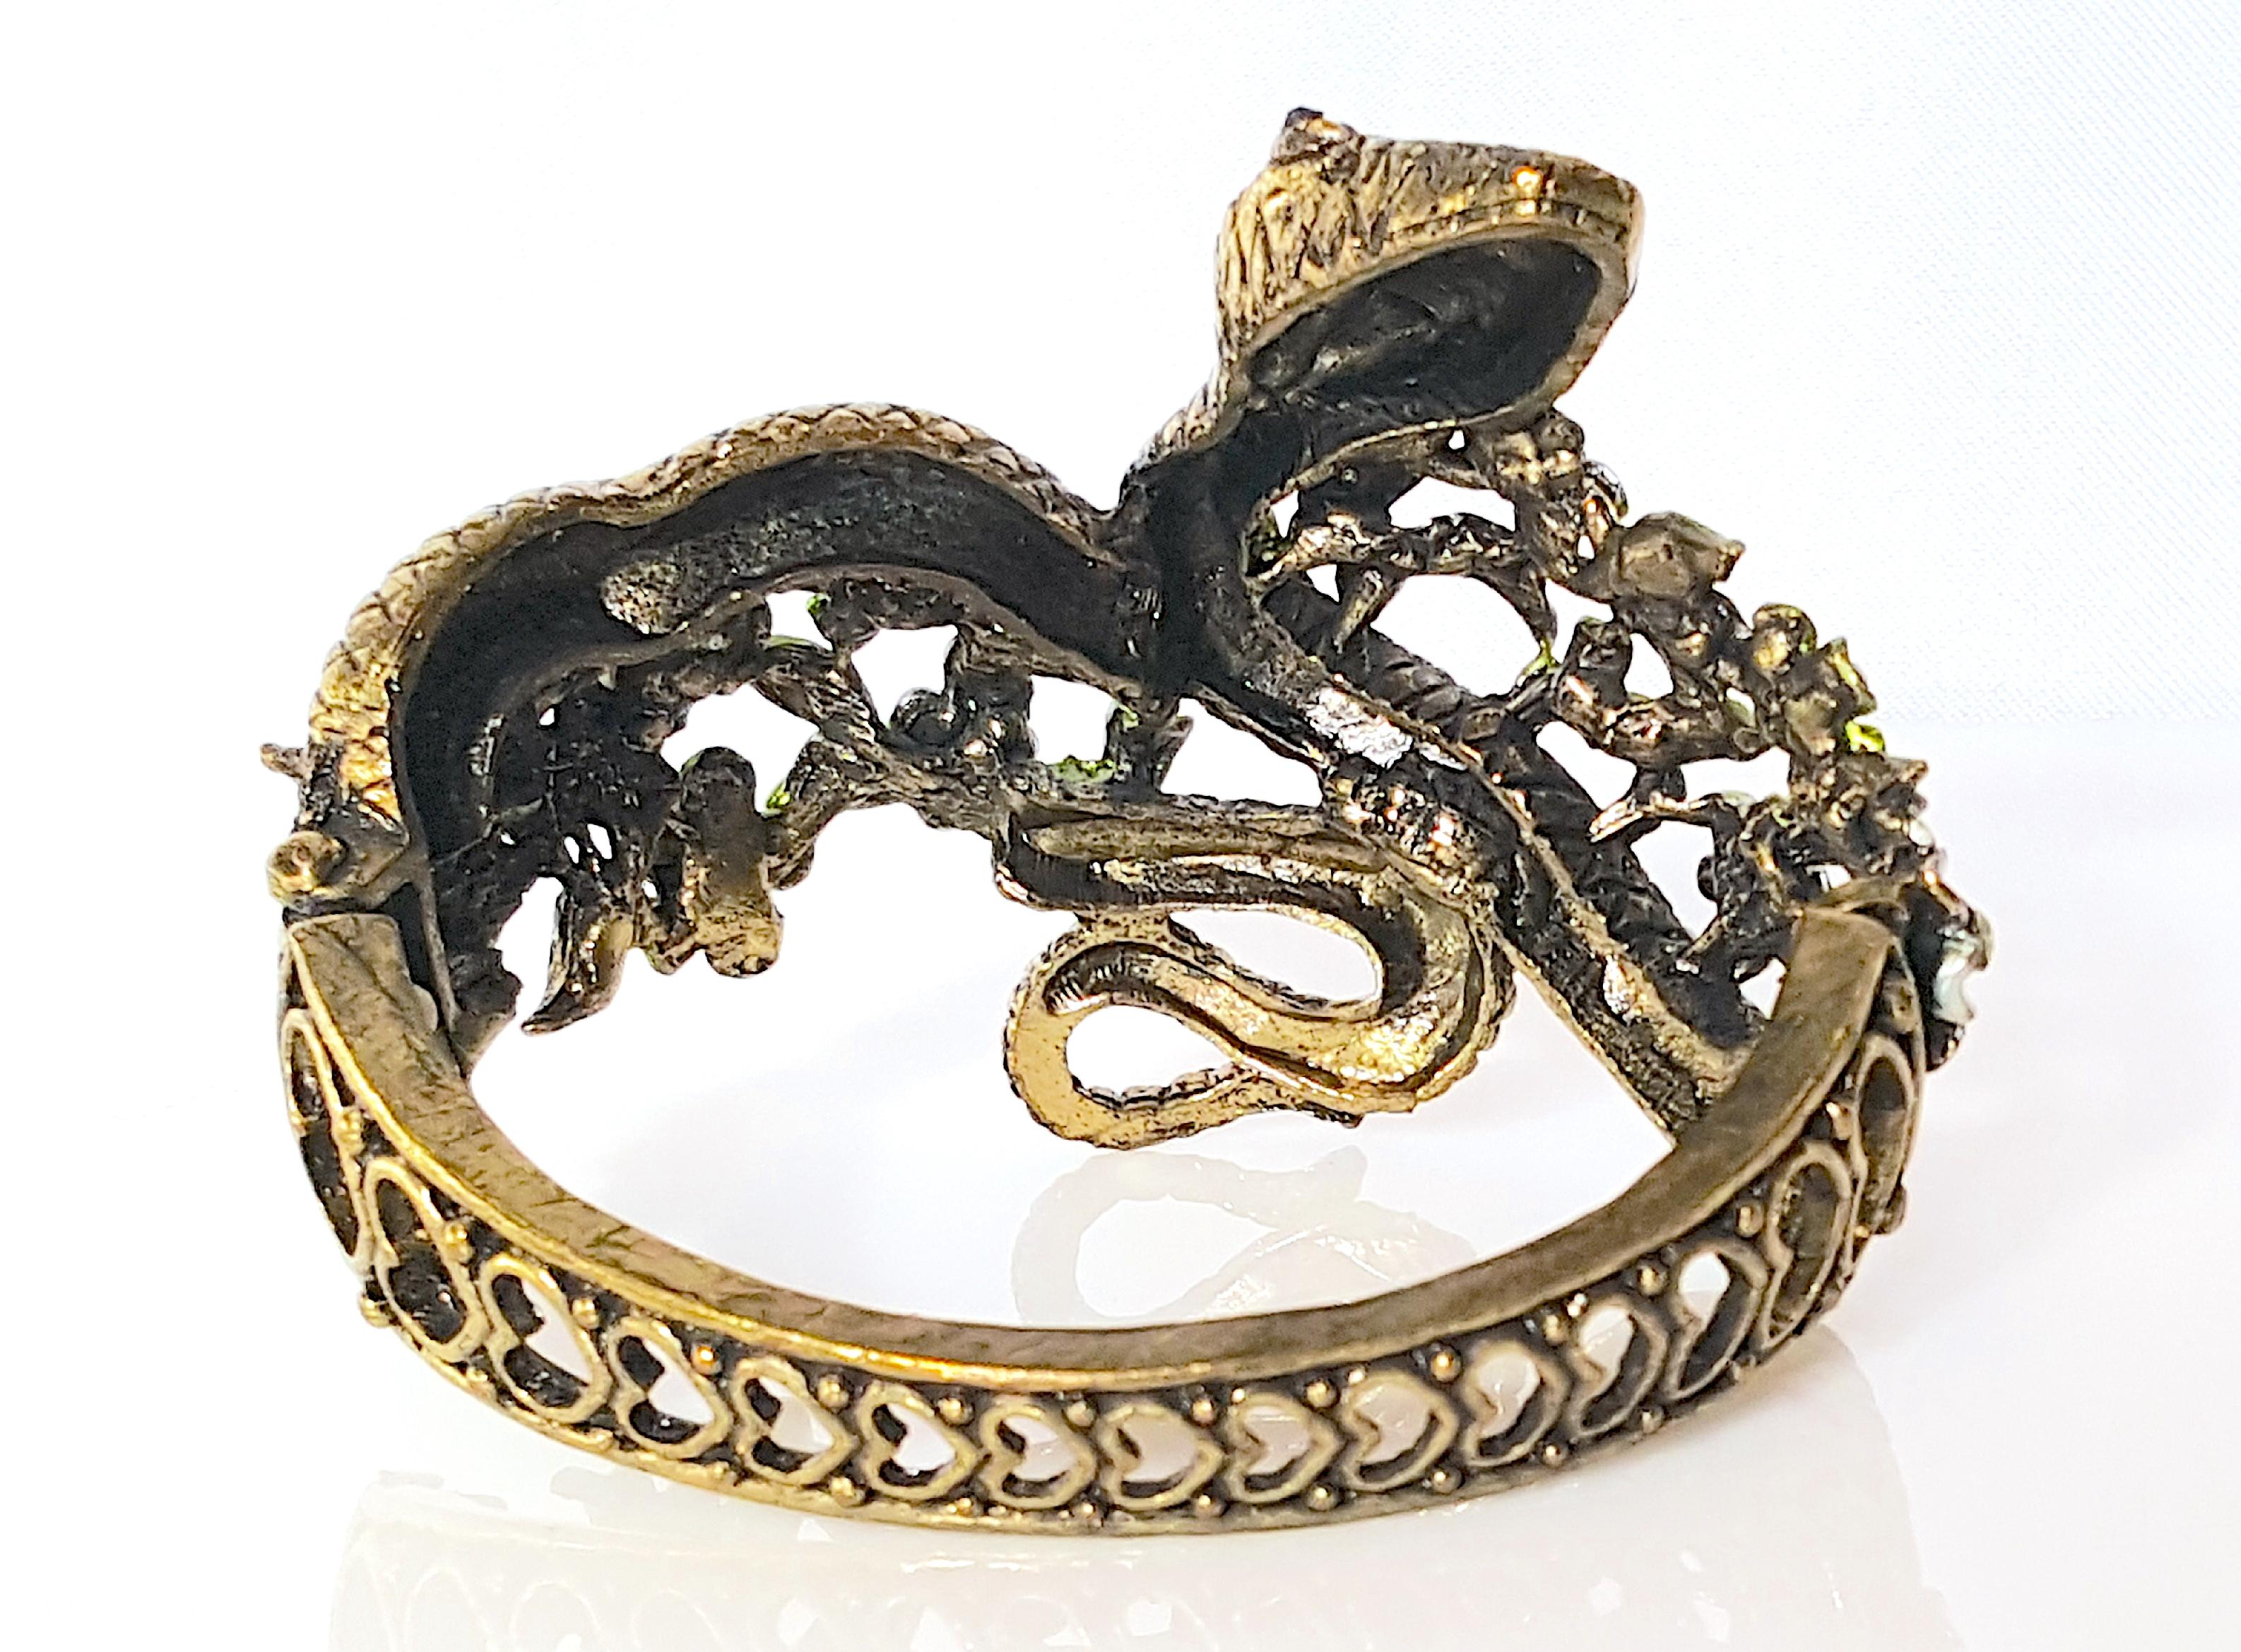 HAR SerpentSnake 1950s Enameled Floral Crystal FiligreeHearts Clamper Bracelet In Good Condition For Sale In Chicago, IL